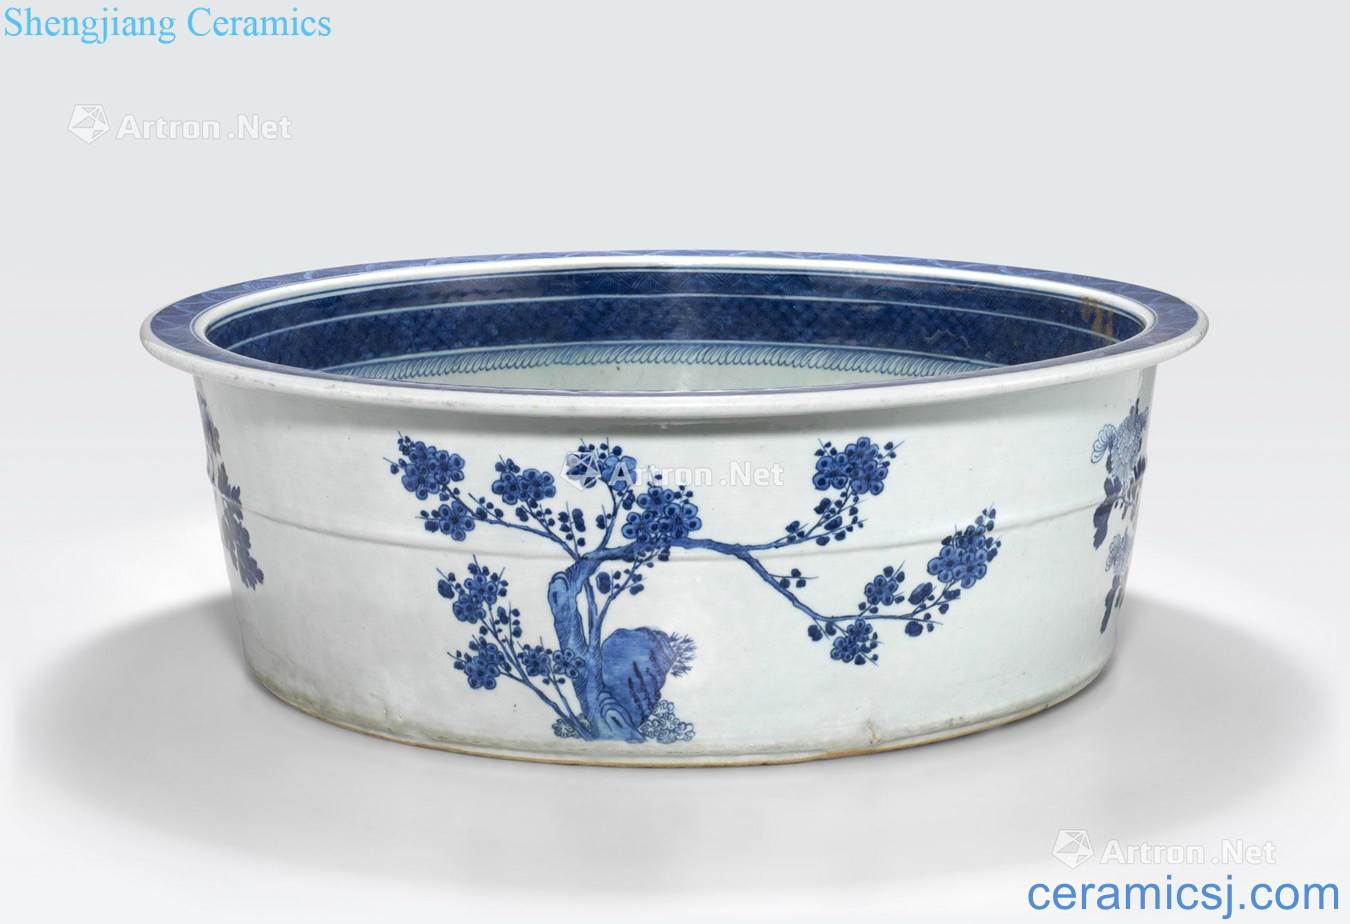 The 19 th century A CANTON BLUE AND WHITE EXPORT PORCELAIN FOOT BASIN